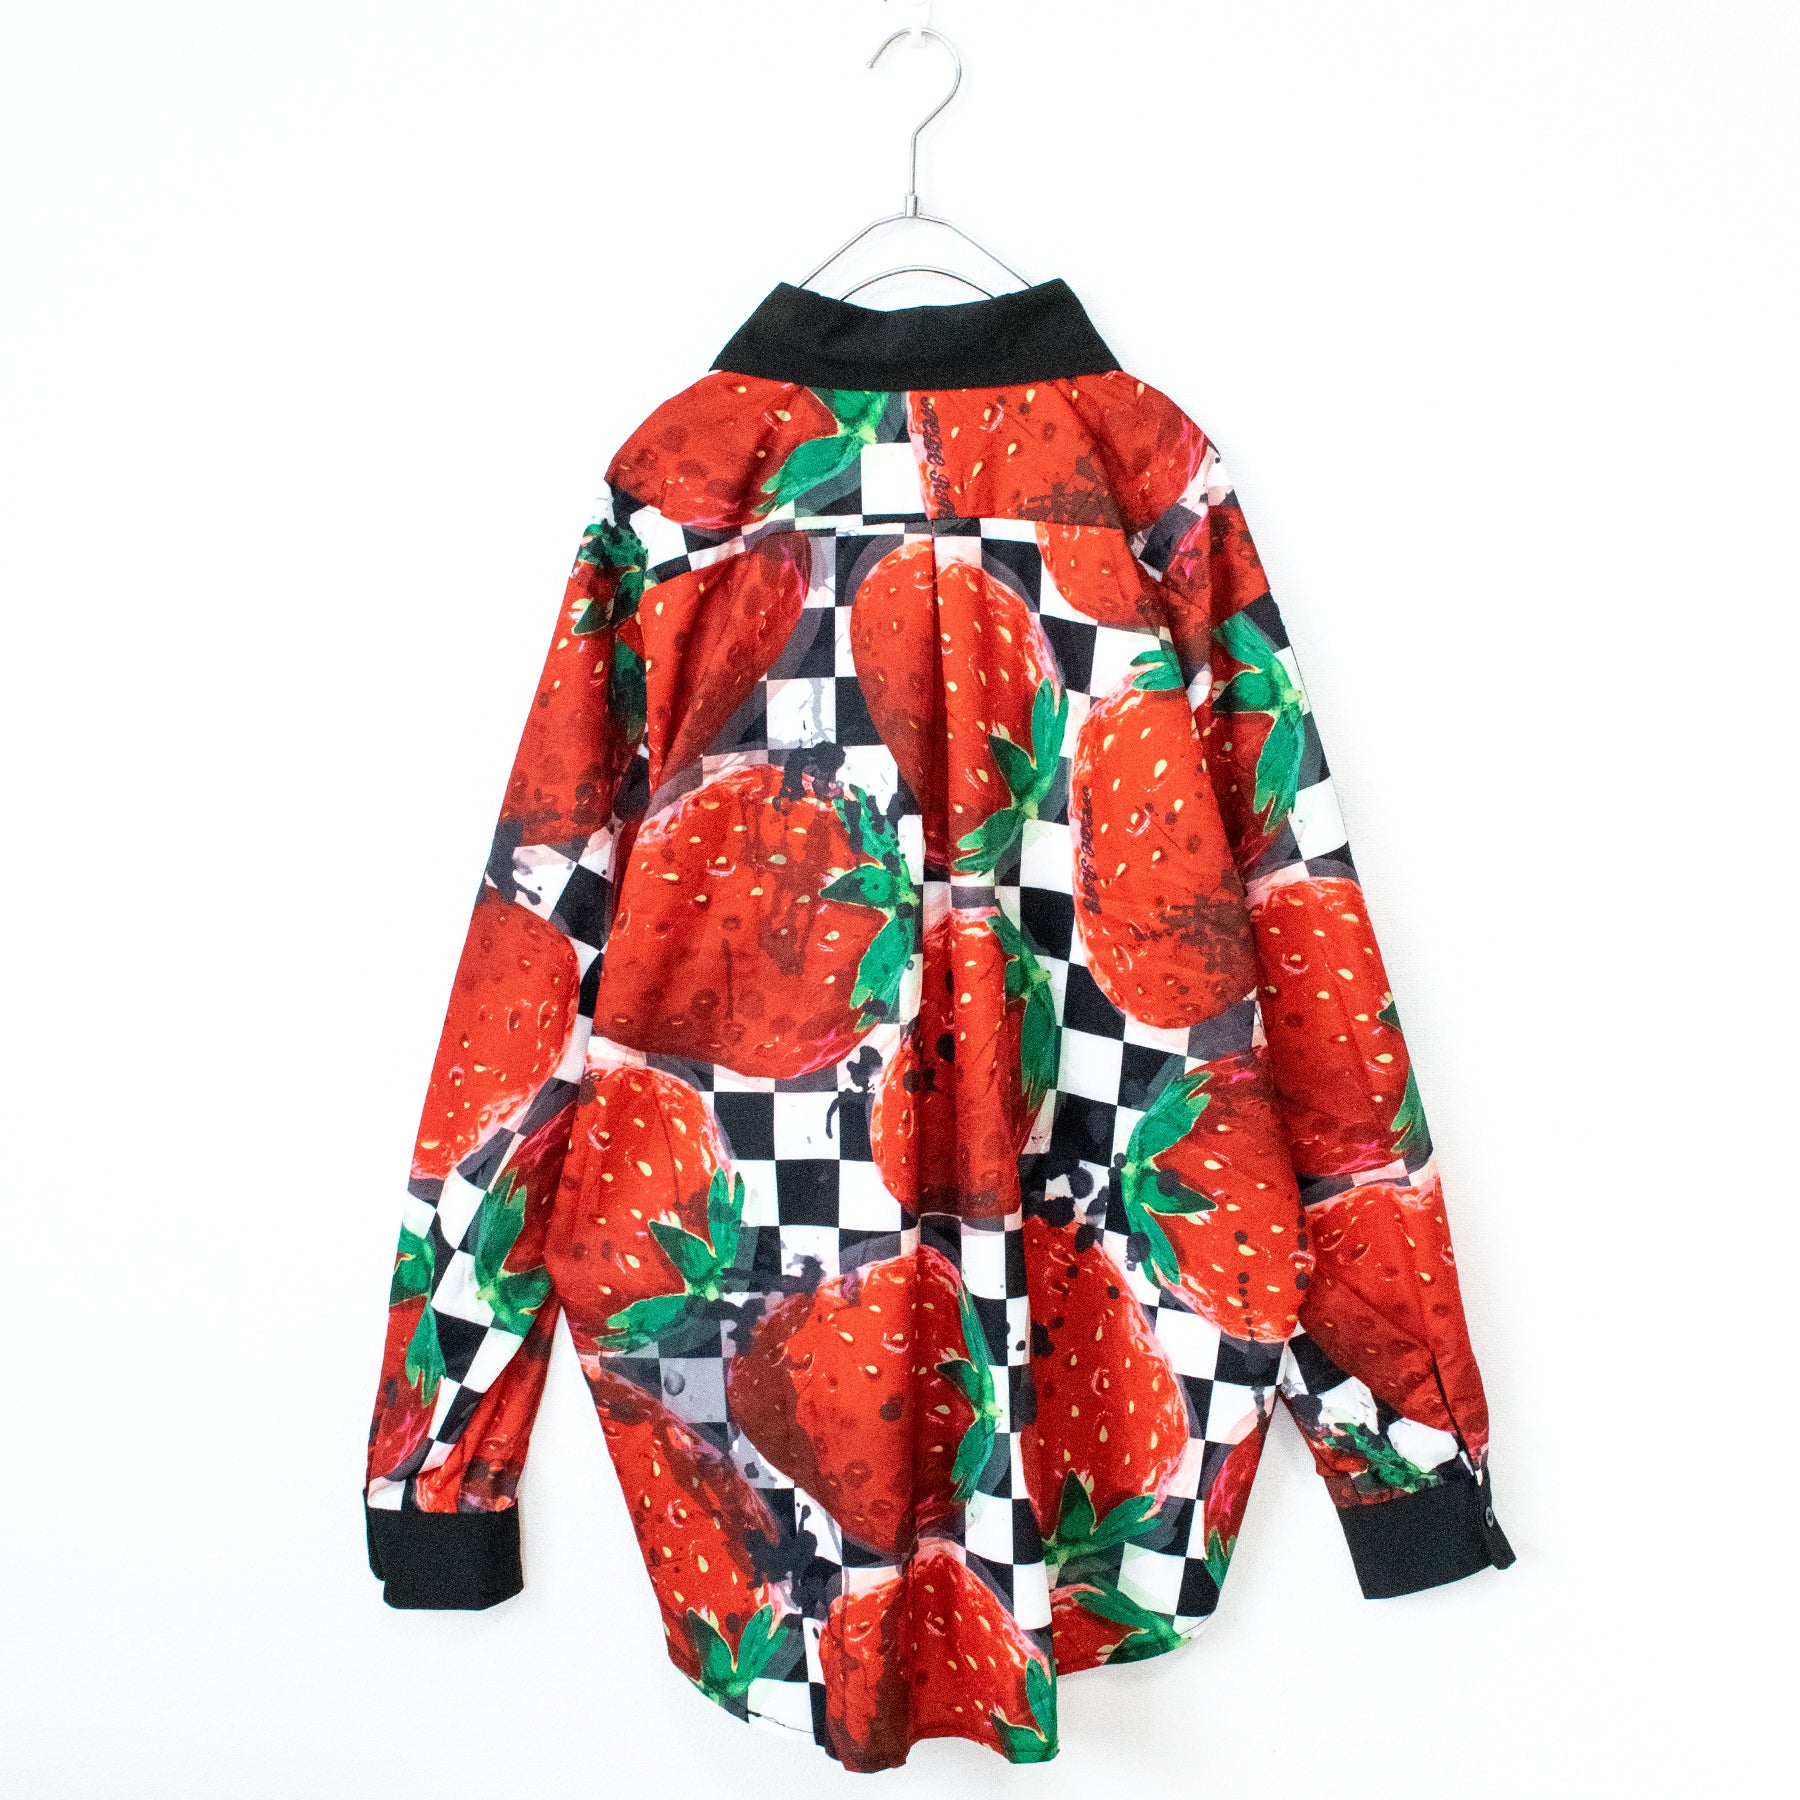 ACDC RAG Checker Fruit L/S Shirt (Red Strawberry) - YOUAREMYPOISON